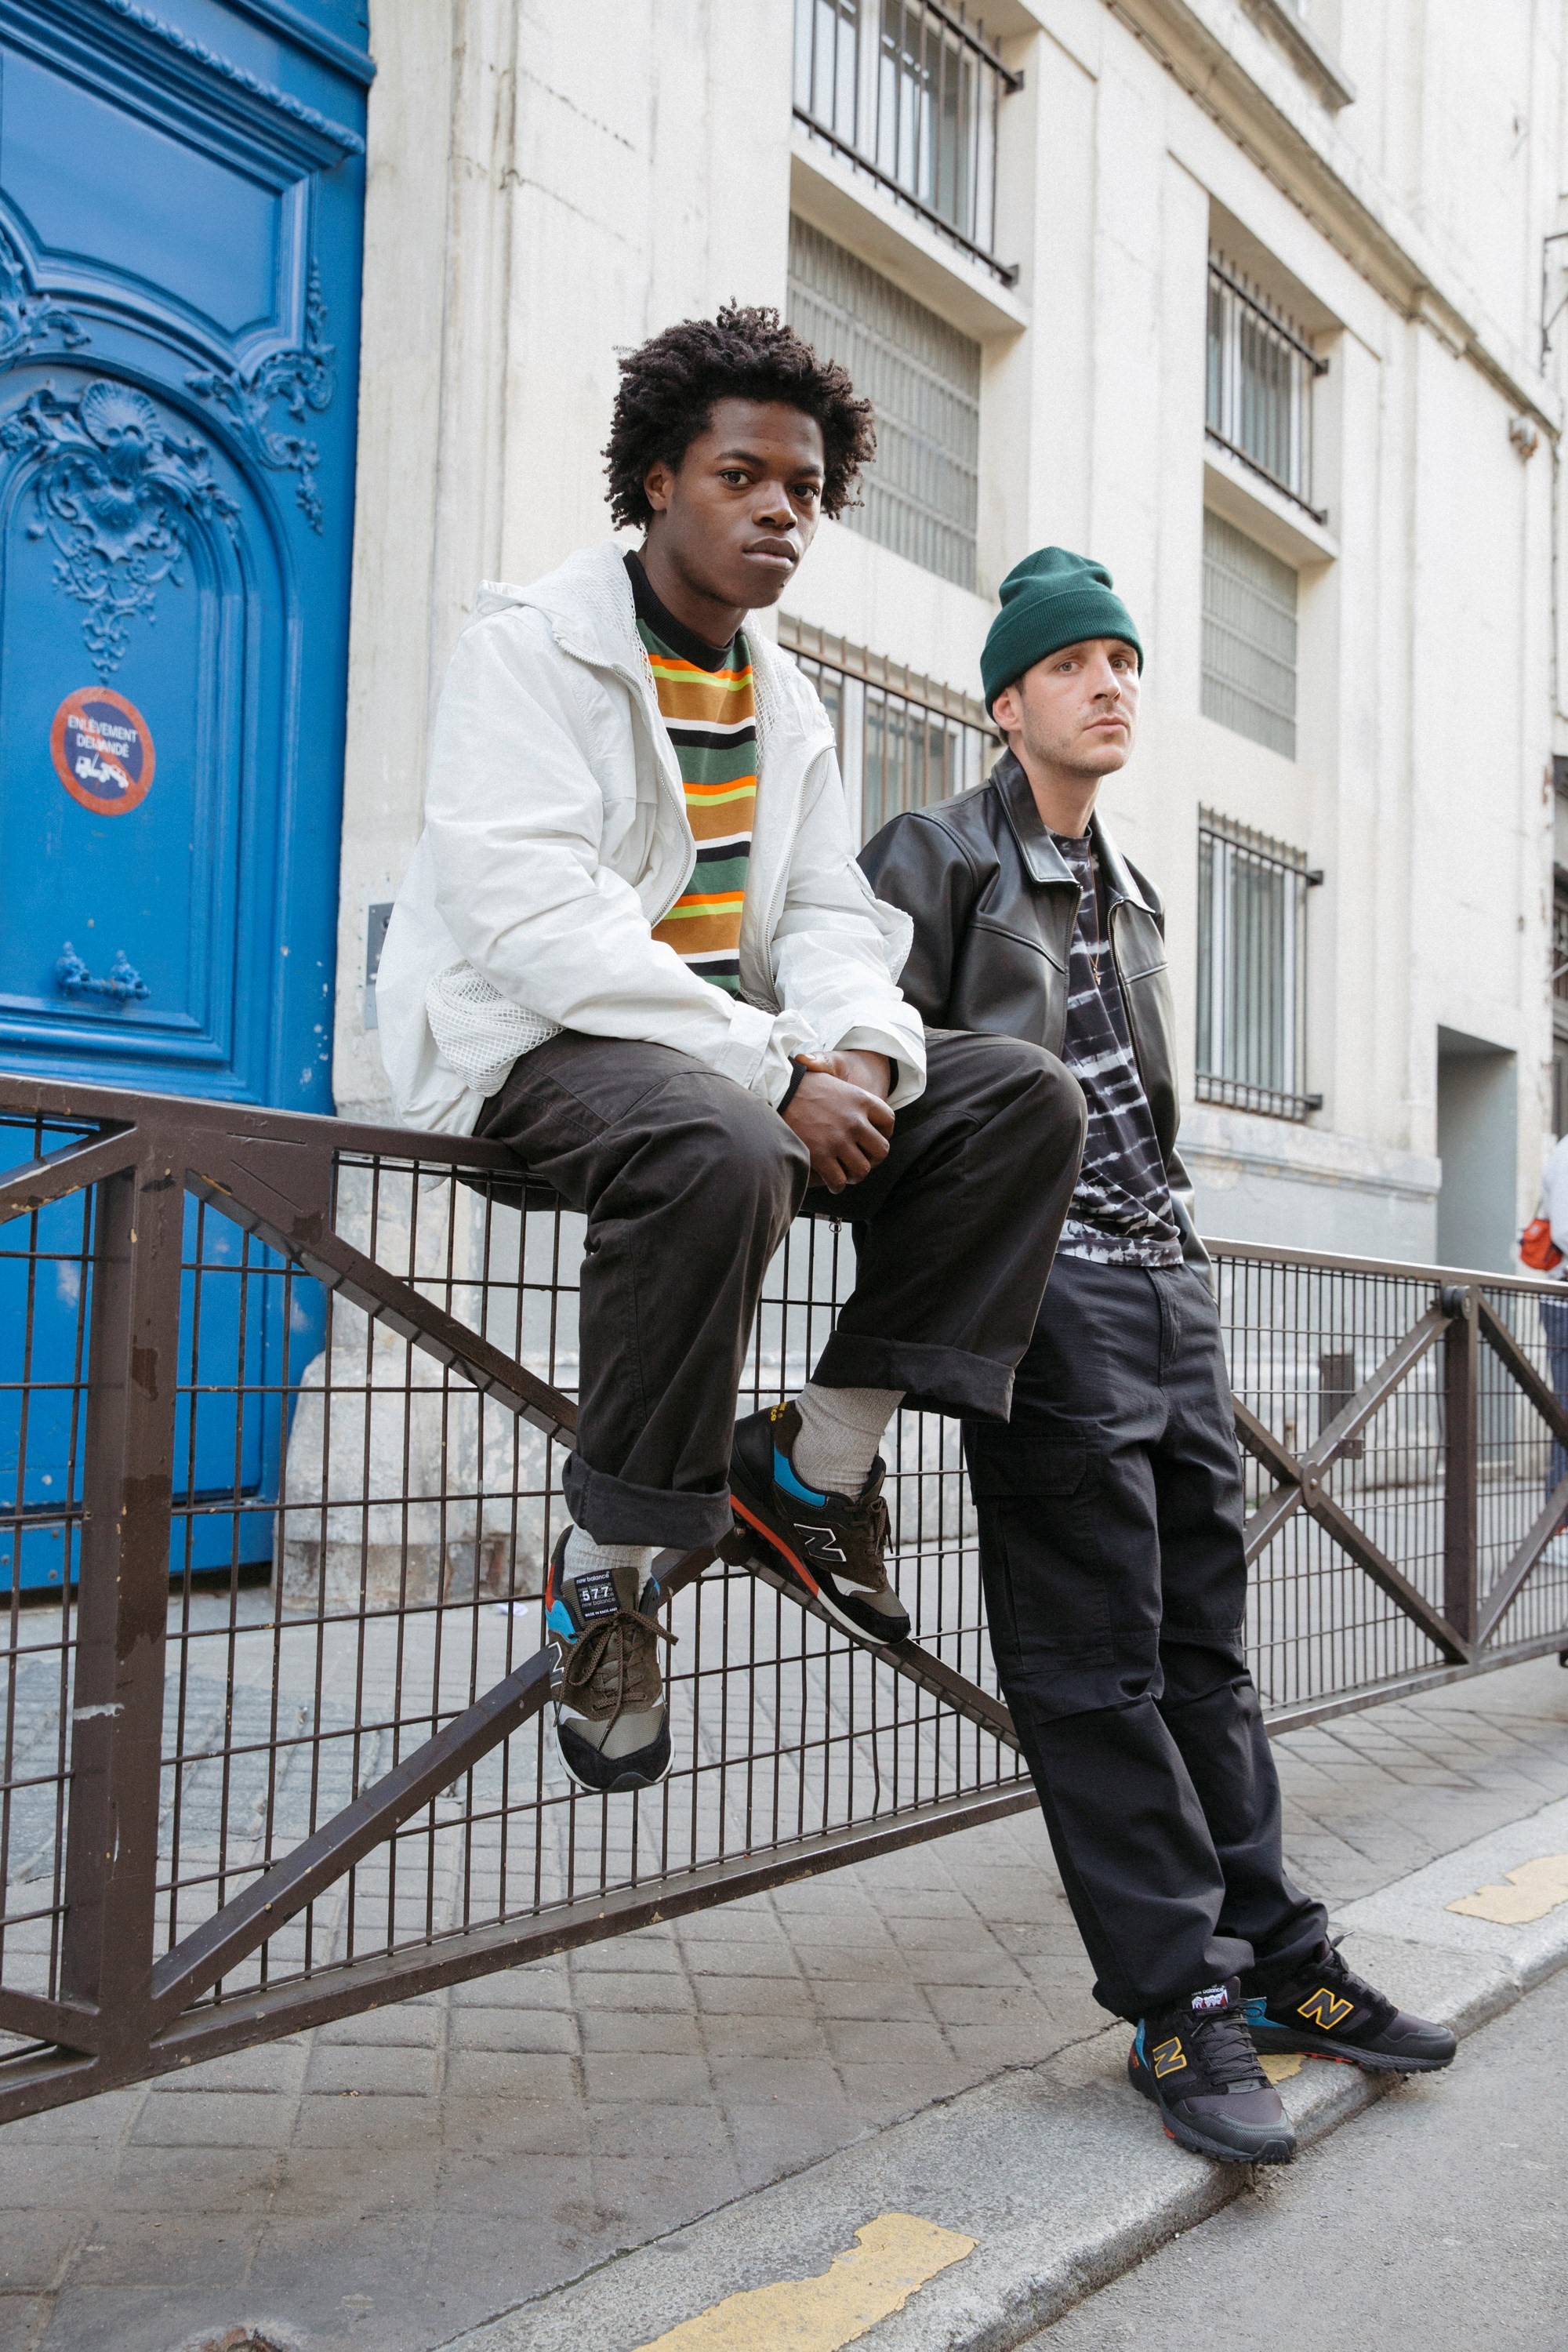 New Balance shoot latest collection on streets of Paris Dazed